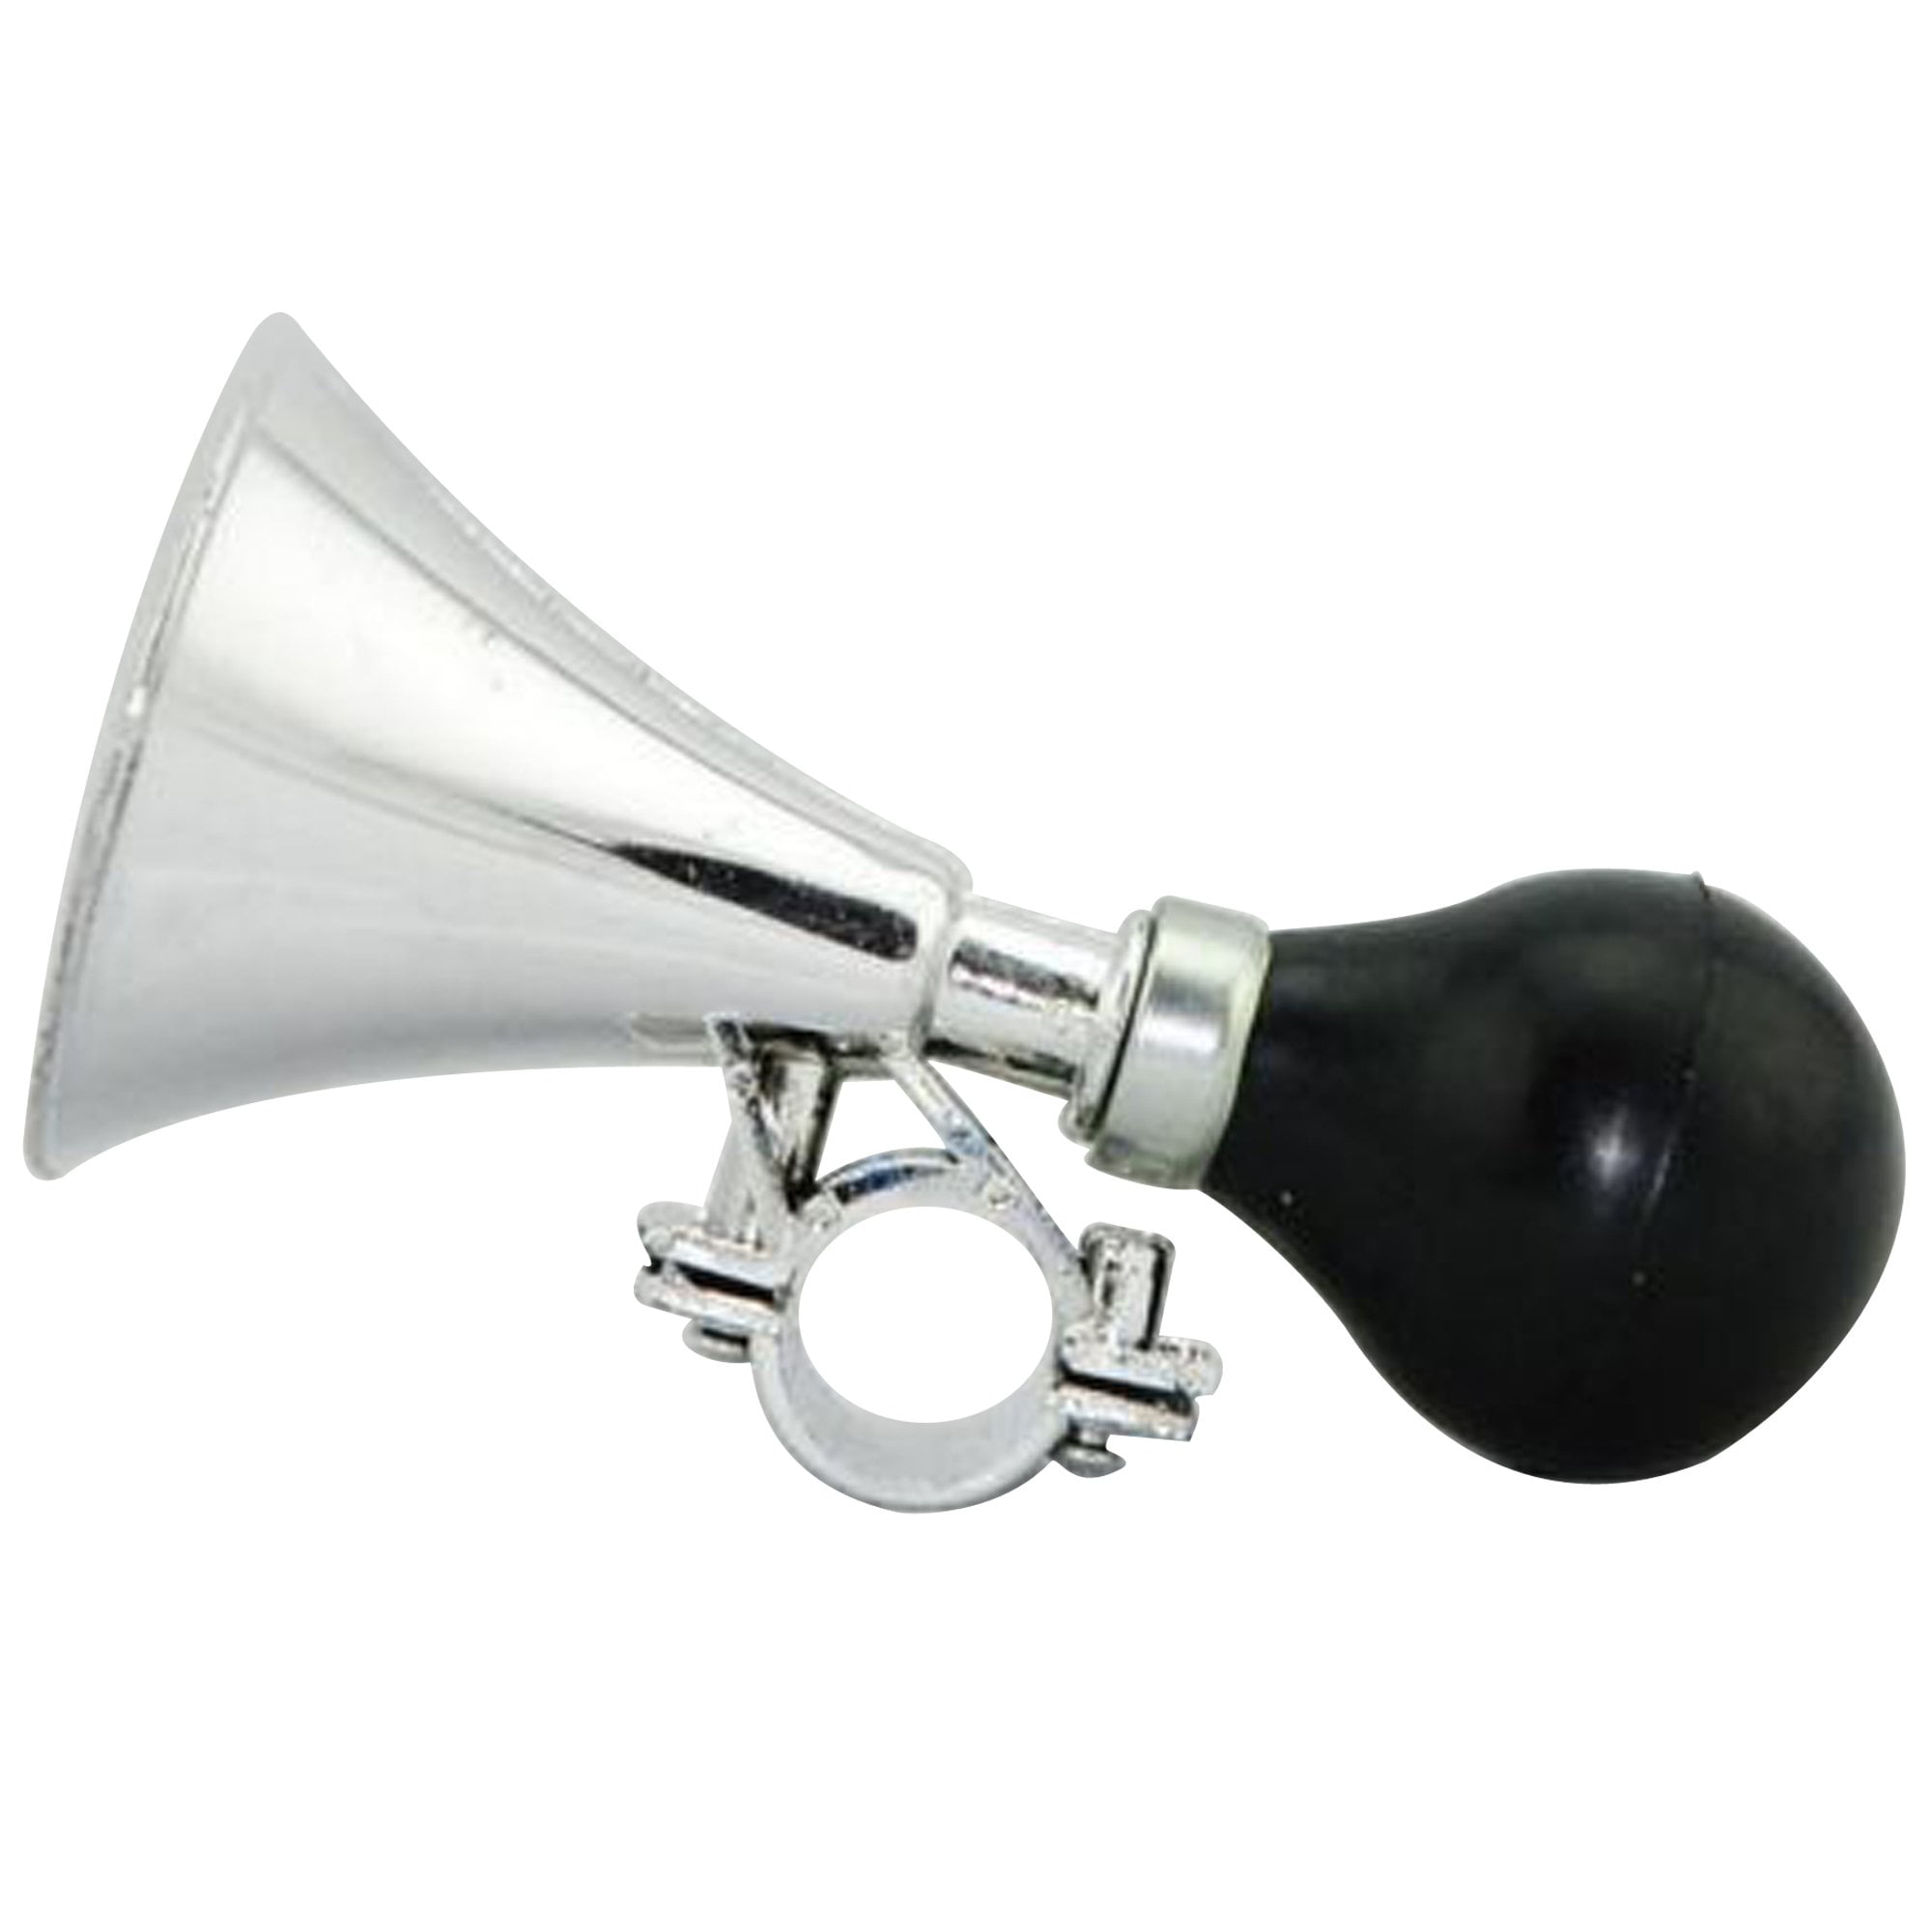 Bike Bicycle Air Horn Rubber Bulb Loud Bugle Trumpet Durable Trumpet-style O3 